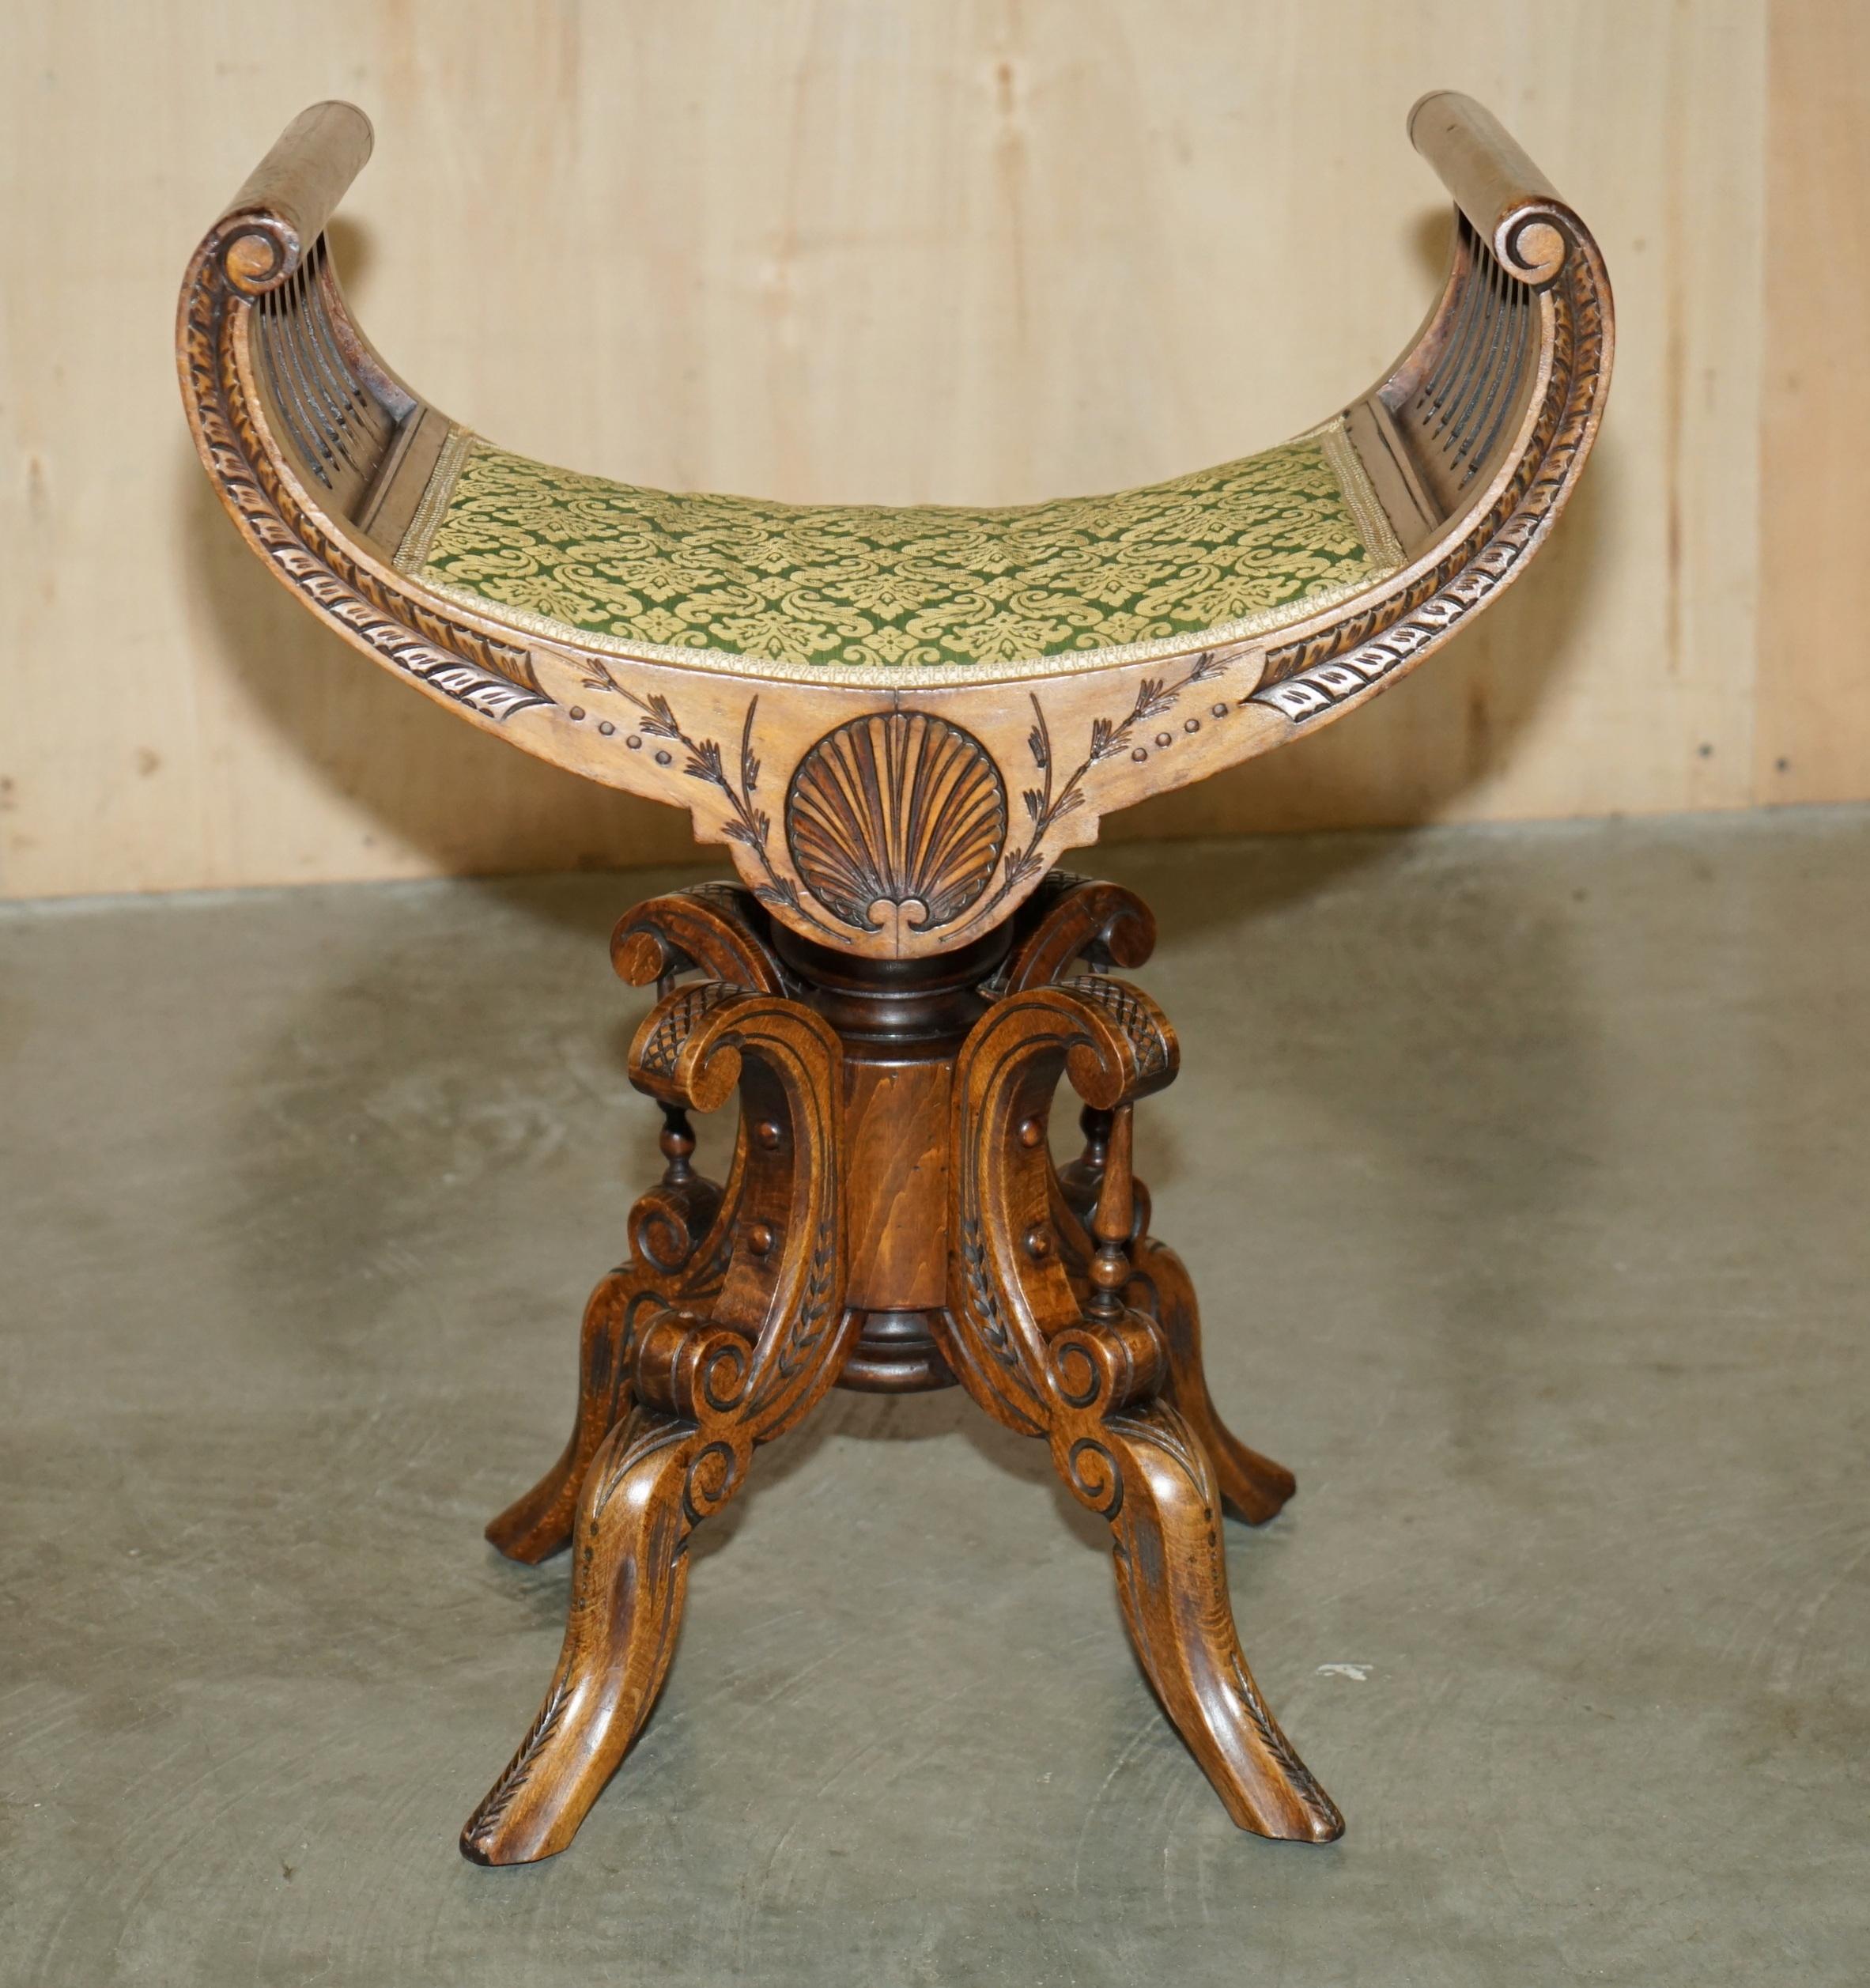 ANTIQUE ViCTORIAN WALNUT MUSIC DRESSING TABLE STOOL DECORATIVE BASE CURVED SEAT For Sale 7